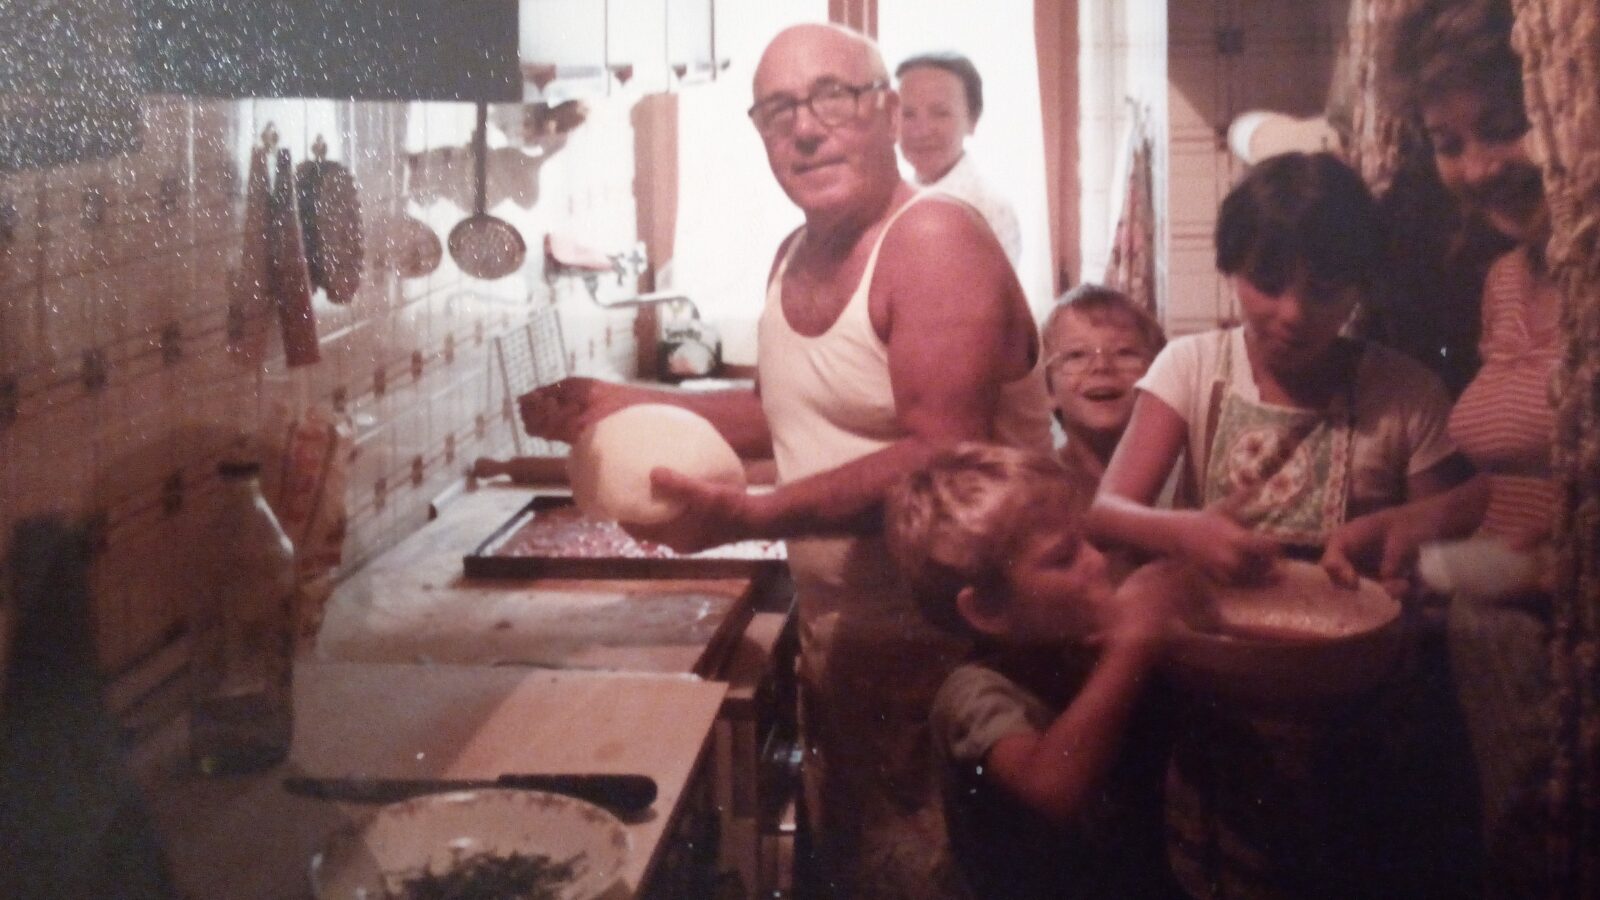 My Grandfather and I with family making pizza.